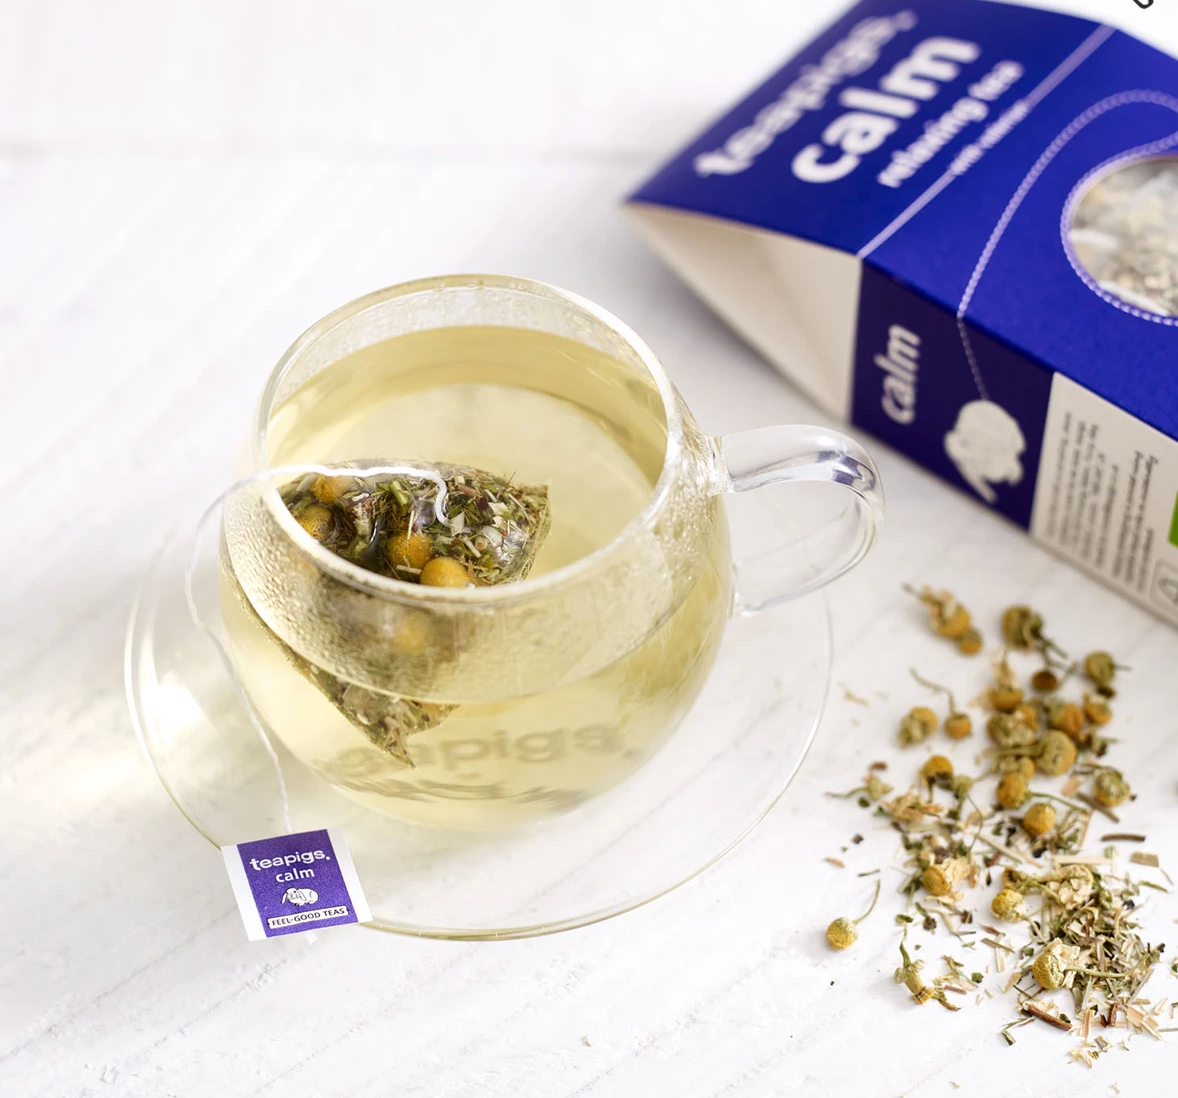 Pictured is a cup of tea next to loose tea and an open package teapigs organic calm tea.